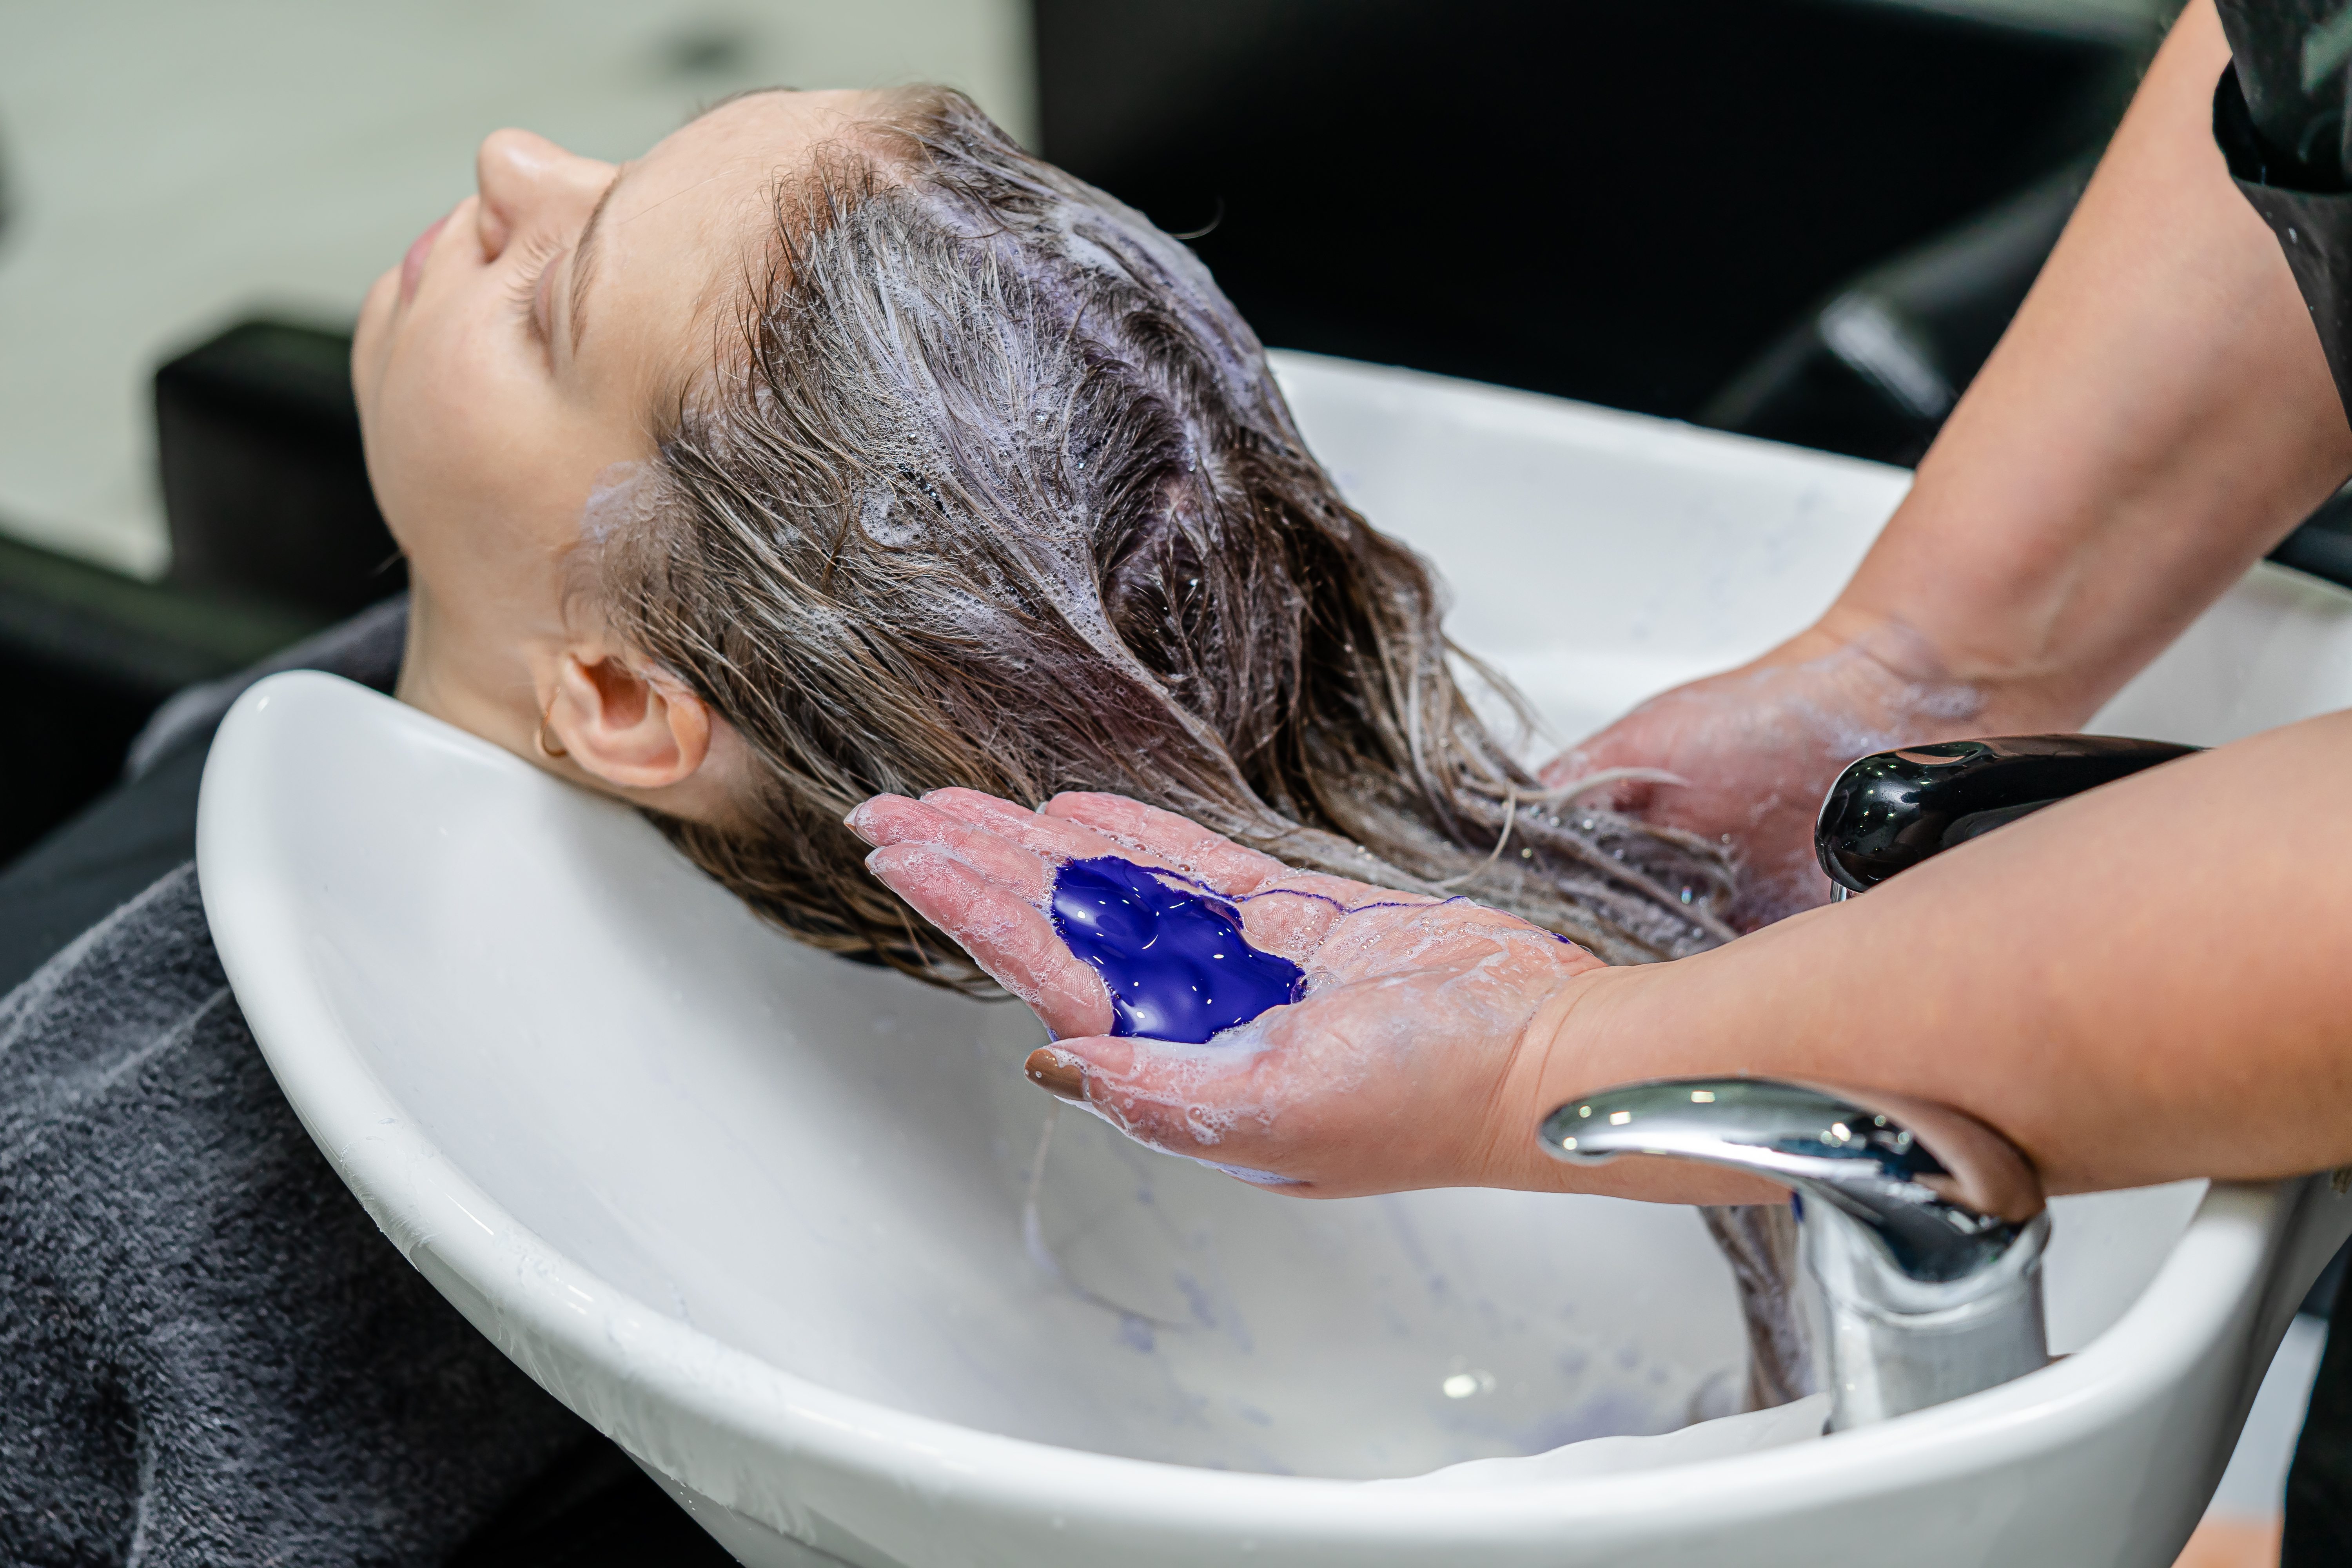 A woman getting her hair washed with purple shampoo | Source: Shutterstock